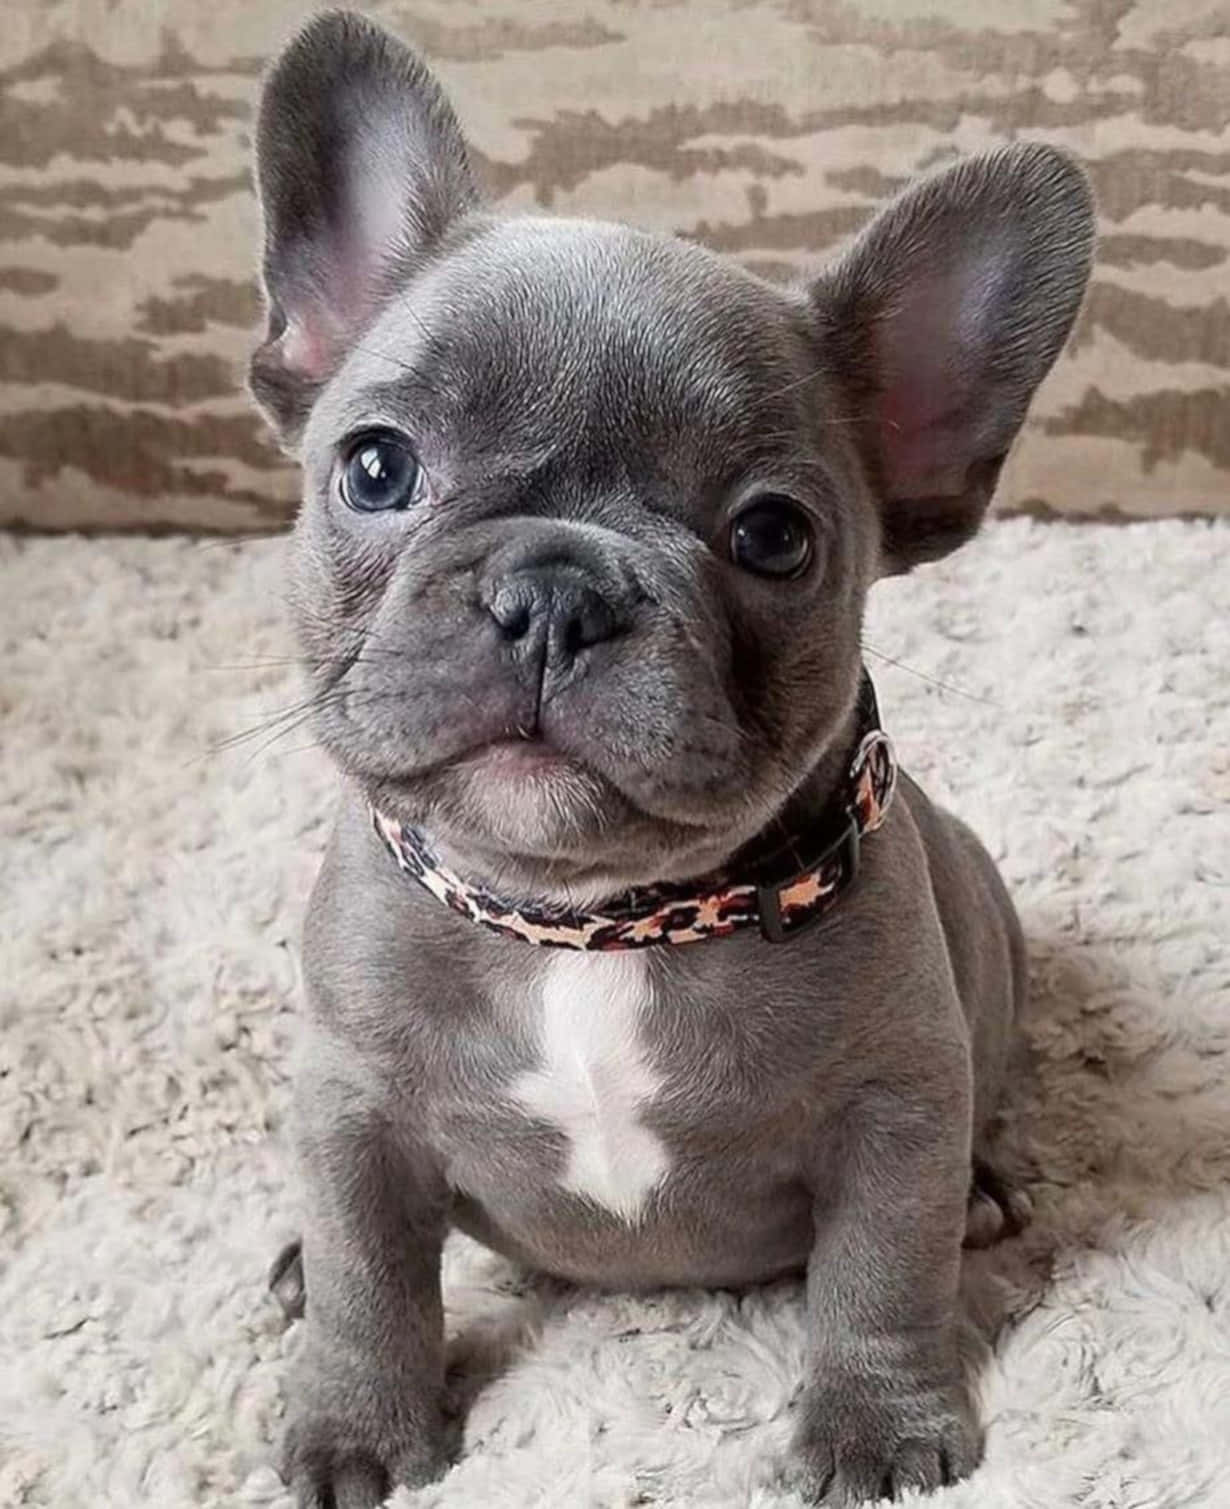 A Small French Bulldog Puppy Sitting On The Carpet